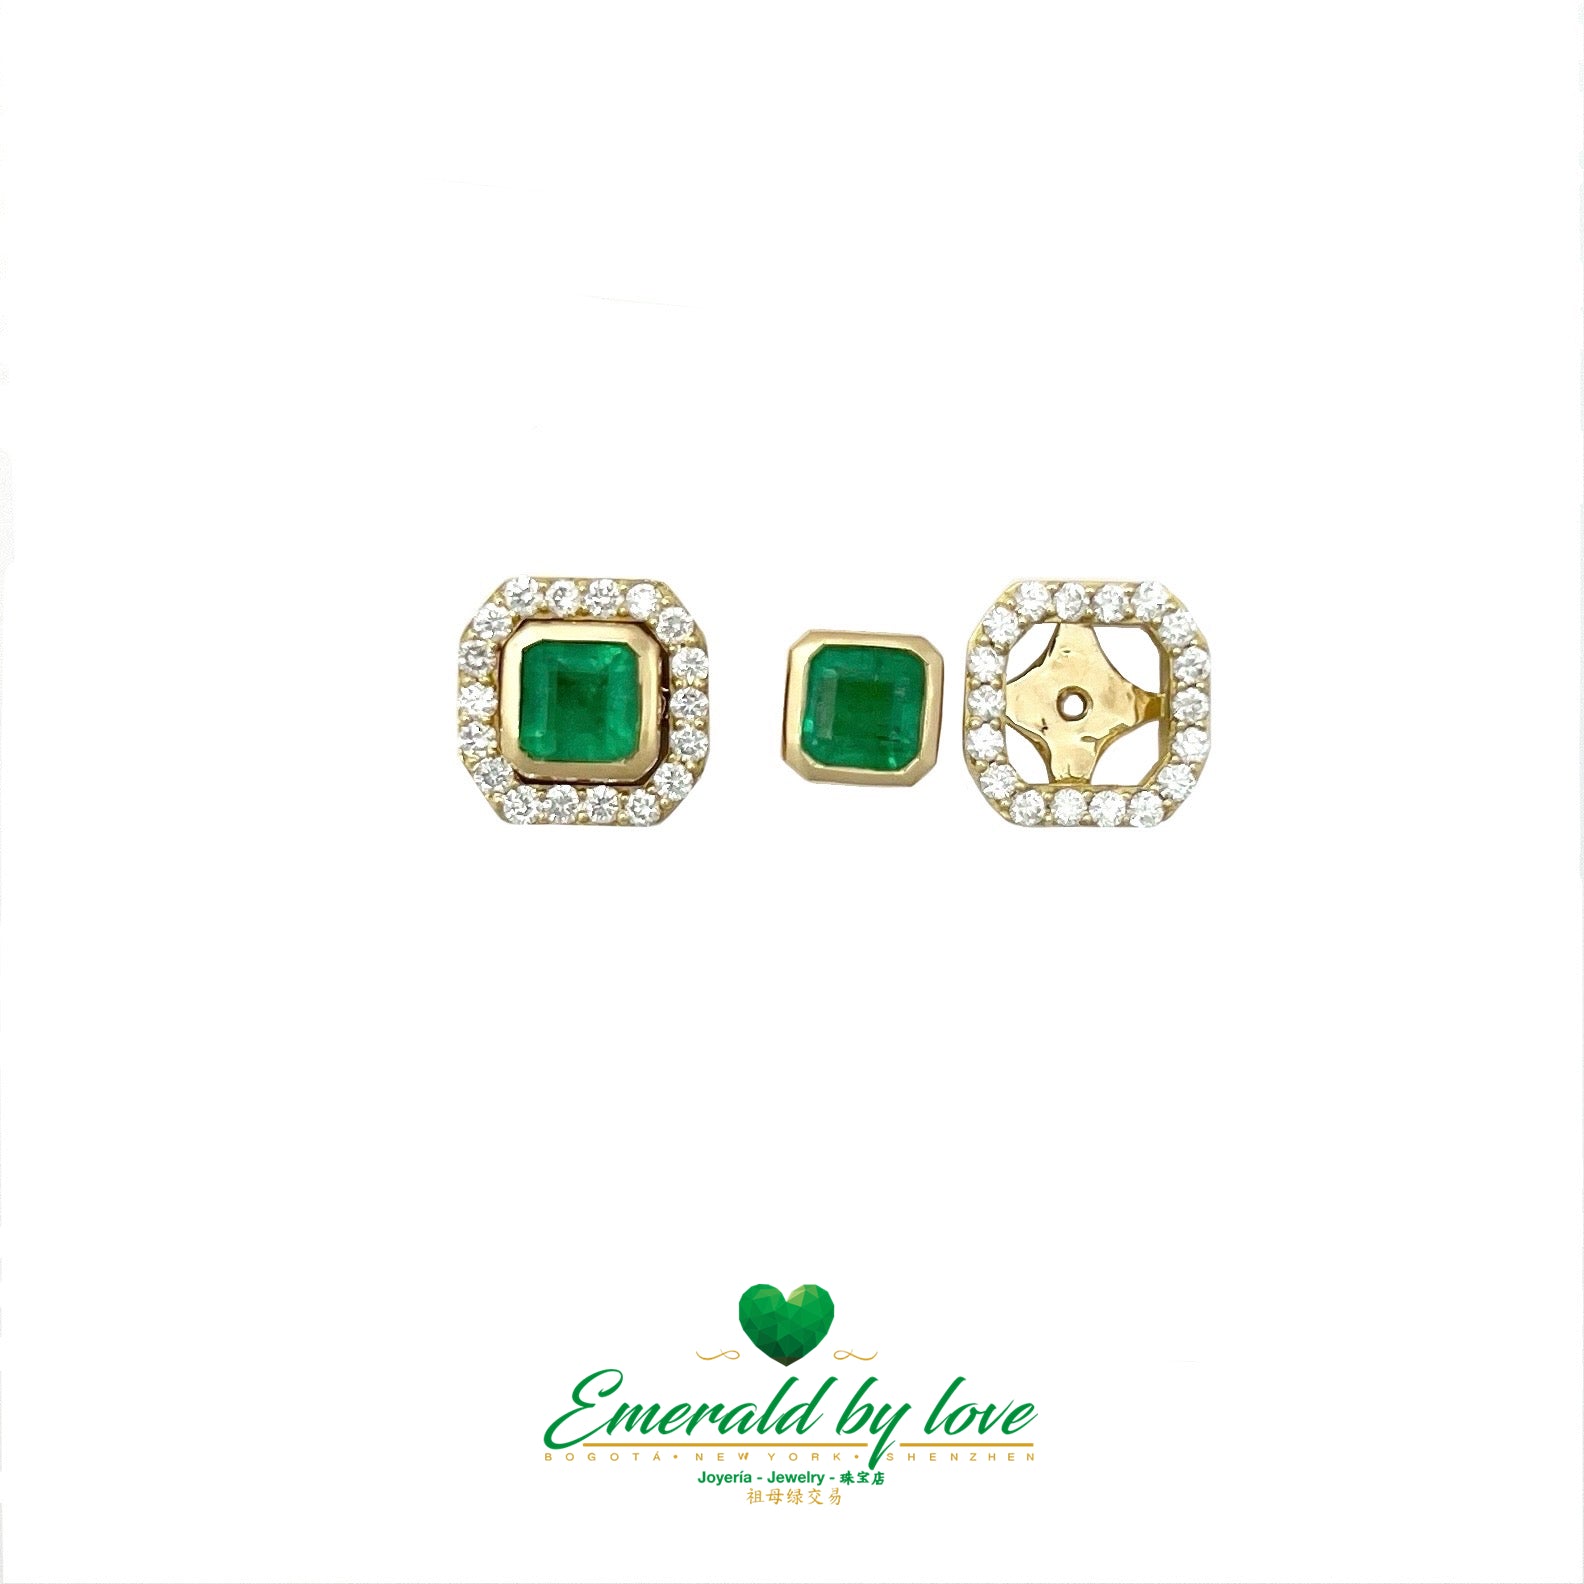 Colombian Emerald and Diamond Jacket Earrings: Exquisite Beauty from the Heart of Colombia